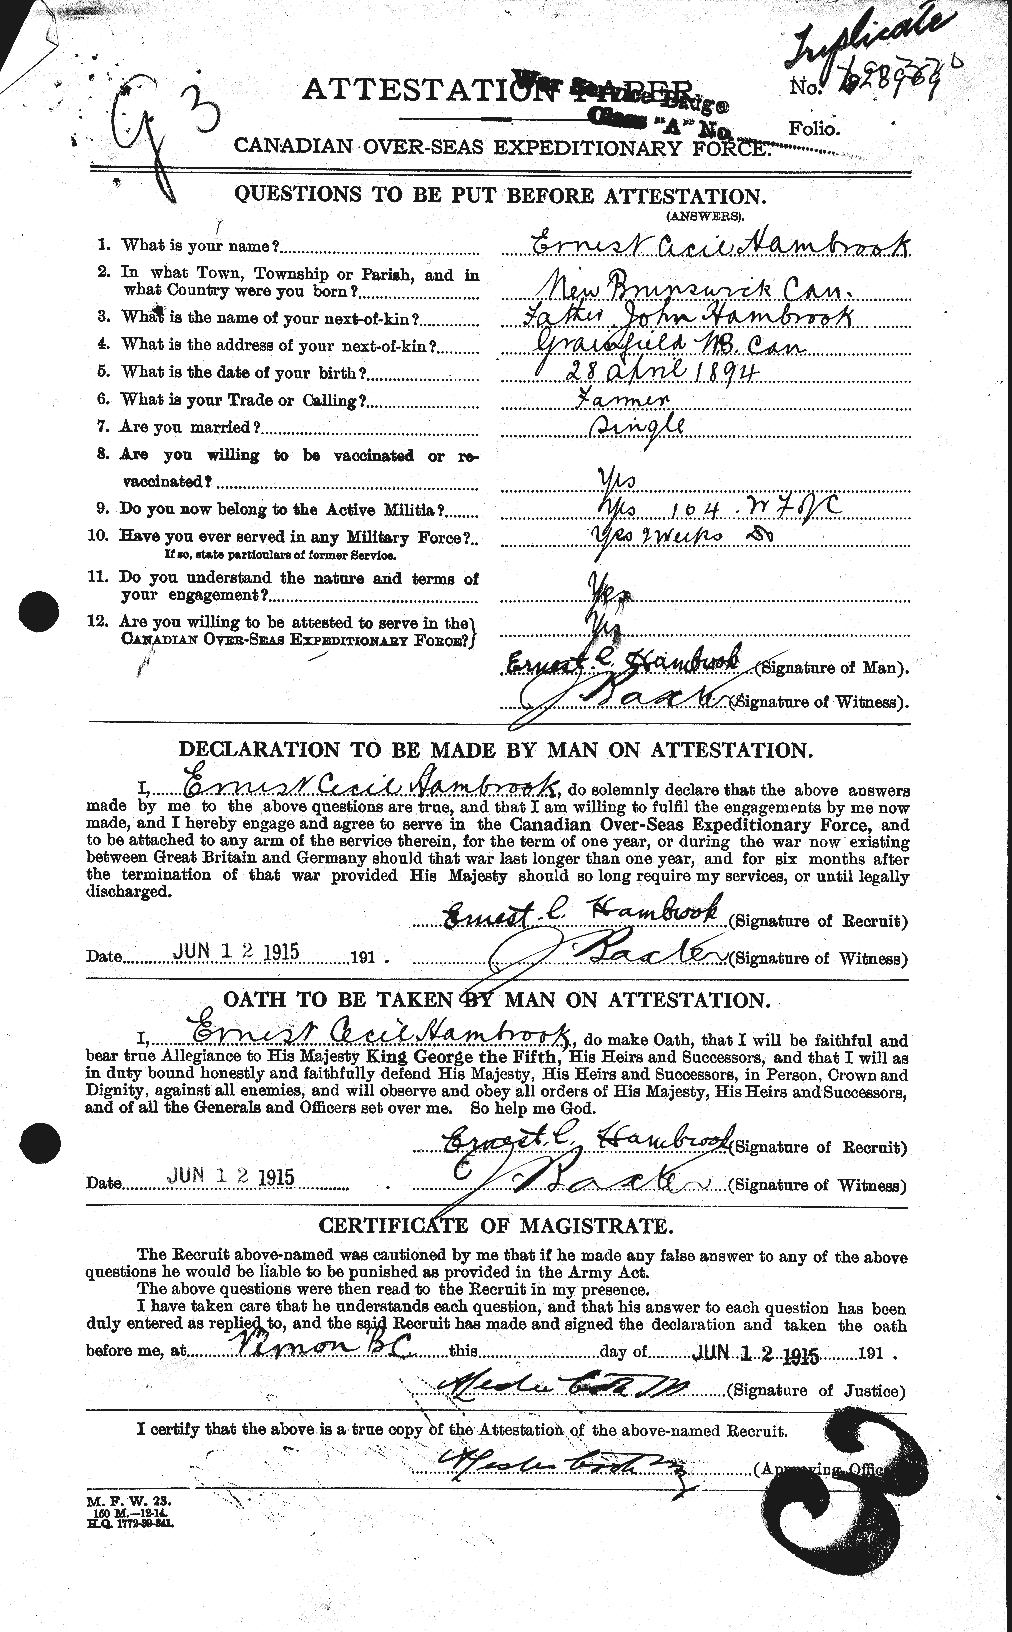 Personnel Records of the First World War - CEF 373844a